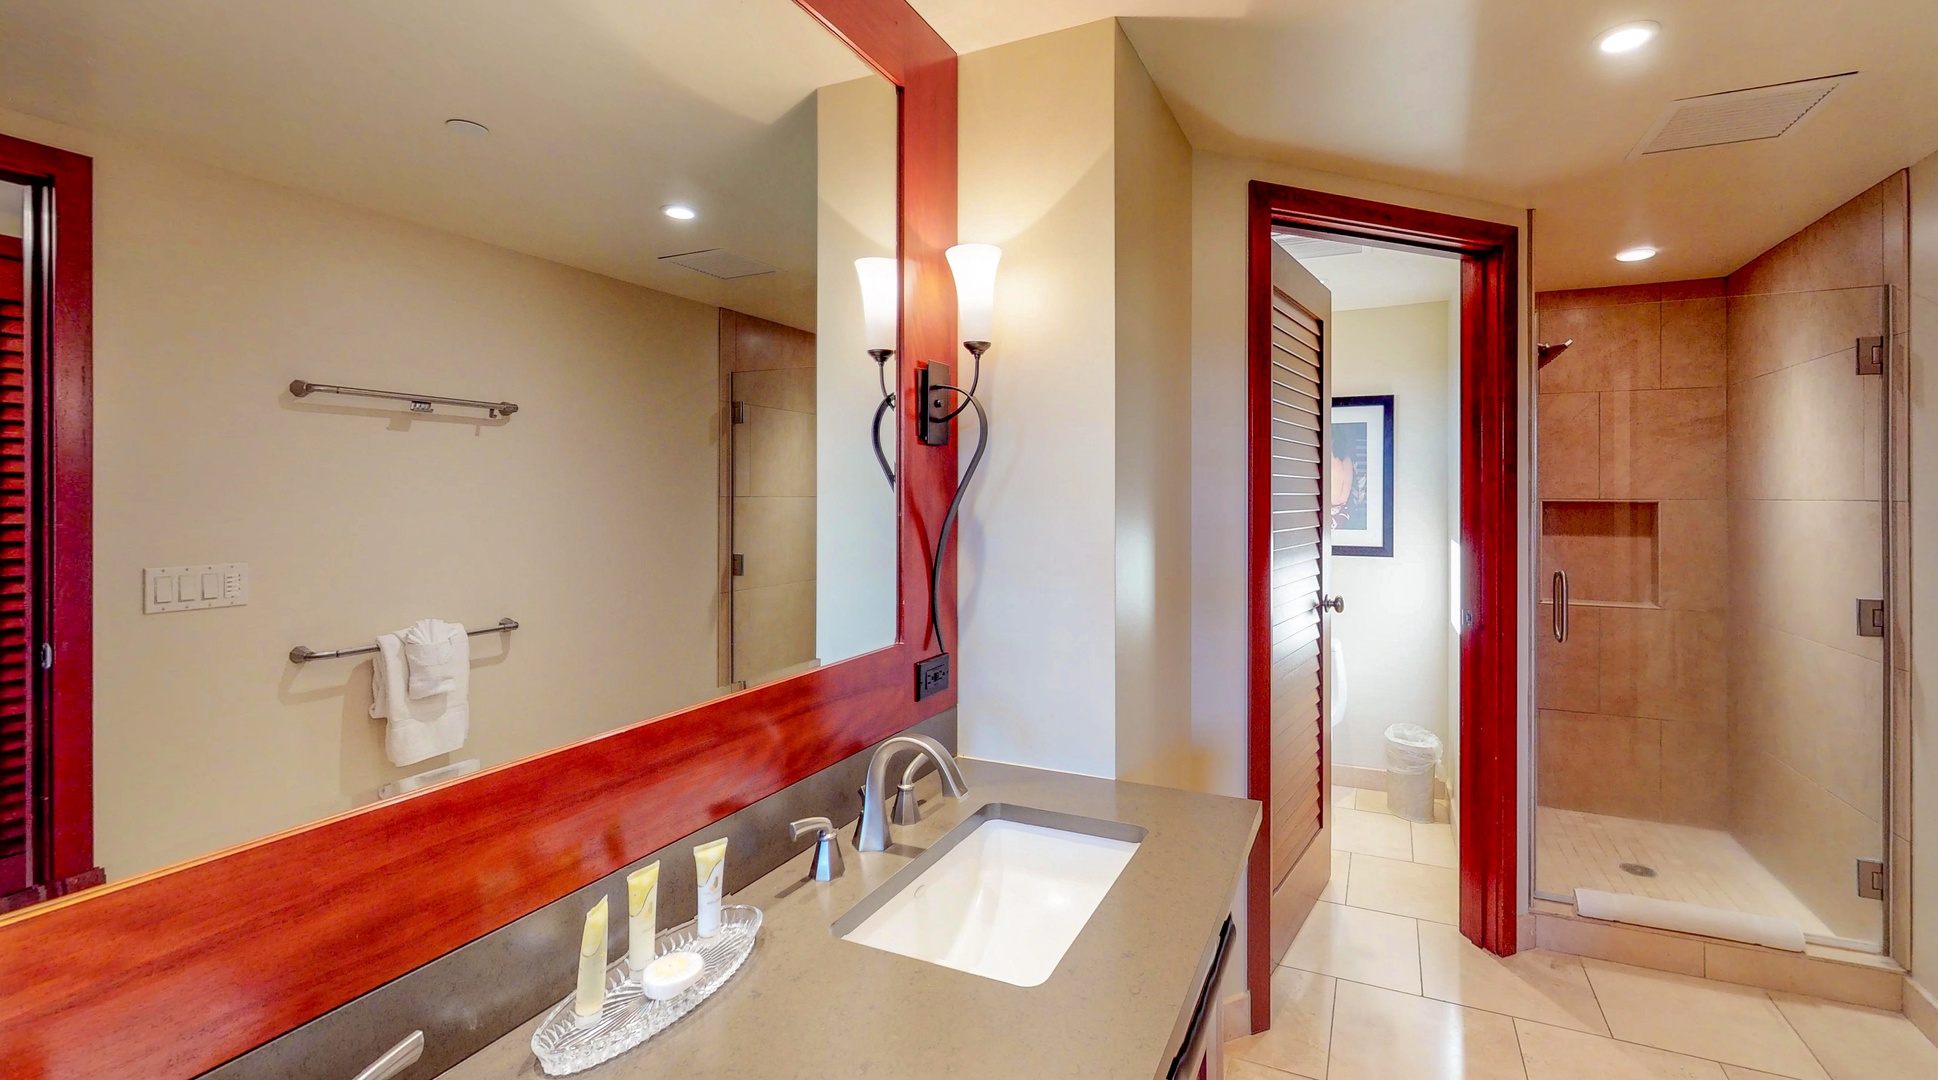 Kapolei Vacation Rentals, Ko Olina Beach Villas O1006 - The primary guest bathroom featuring a walk-in shower and double vanity.